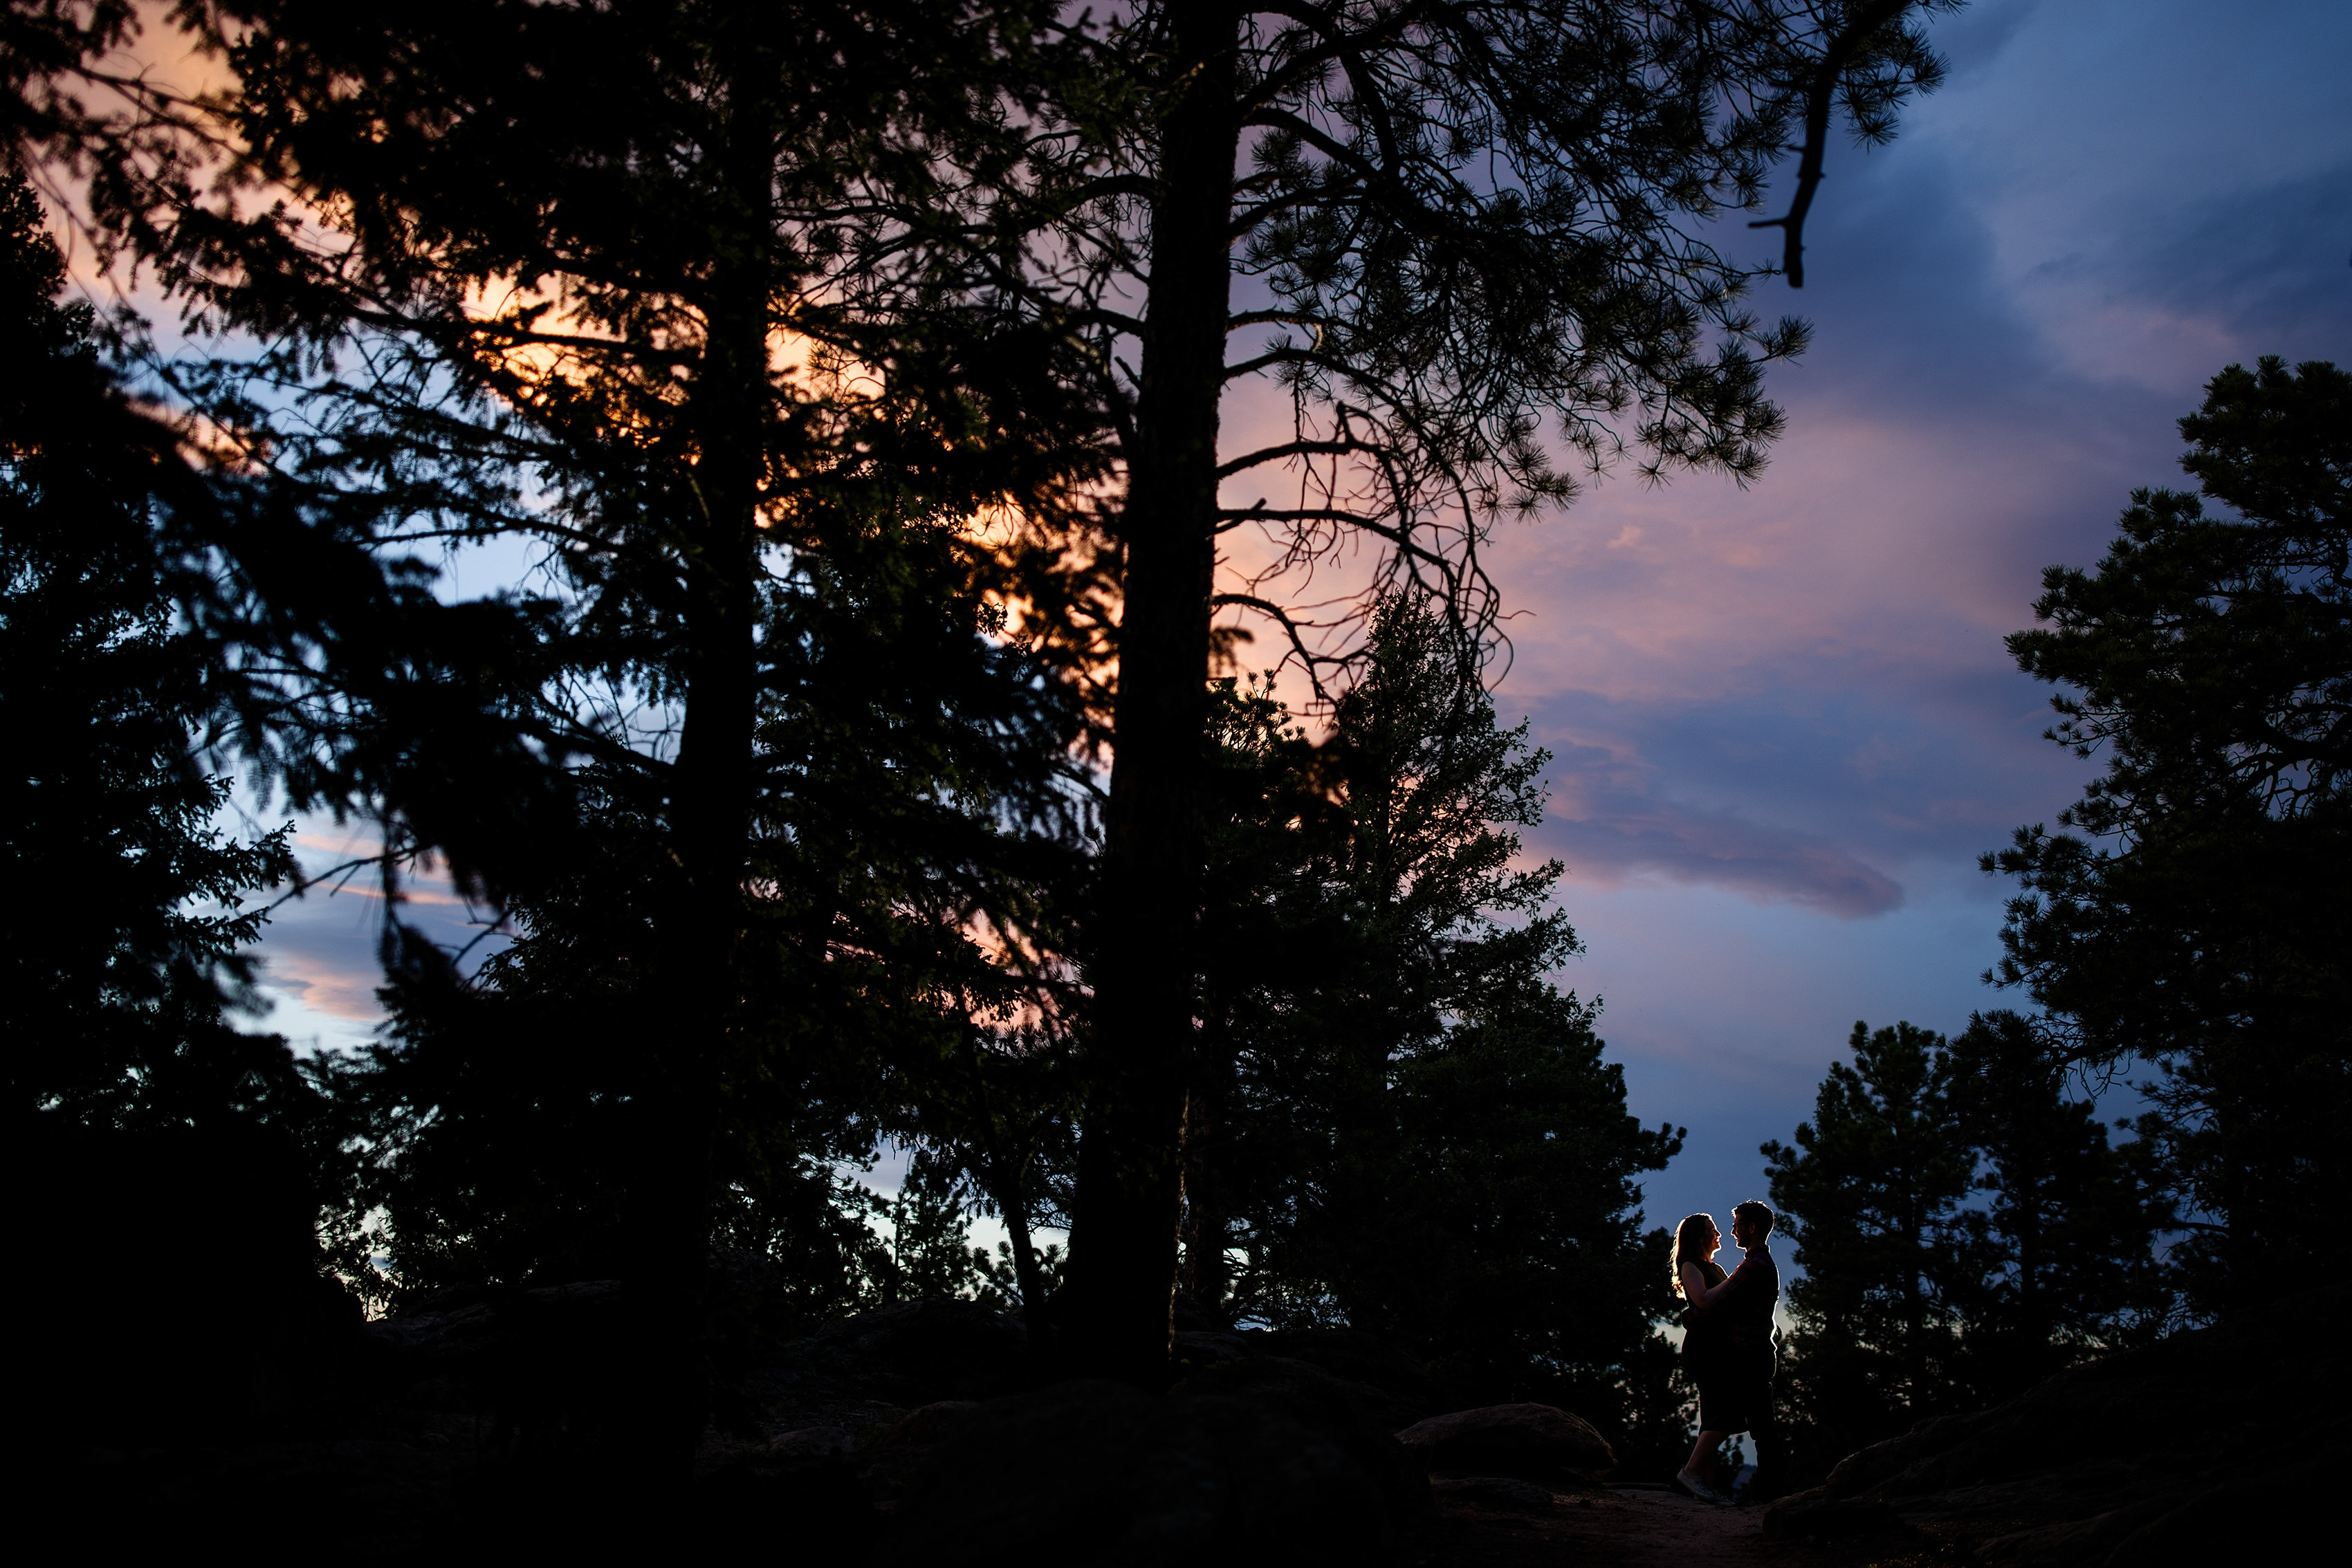 A couple hugs each other as the sun sets behind them in the trees in Evergreen